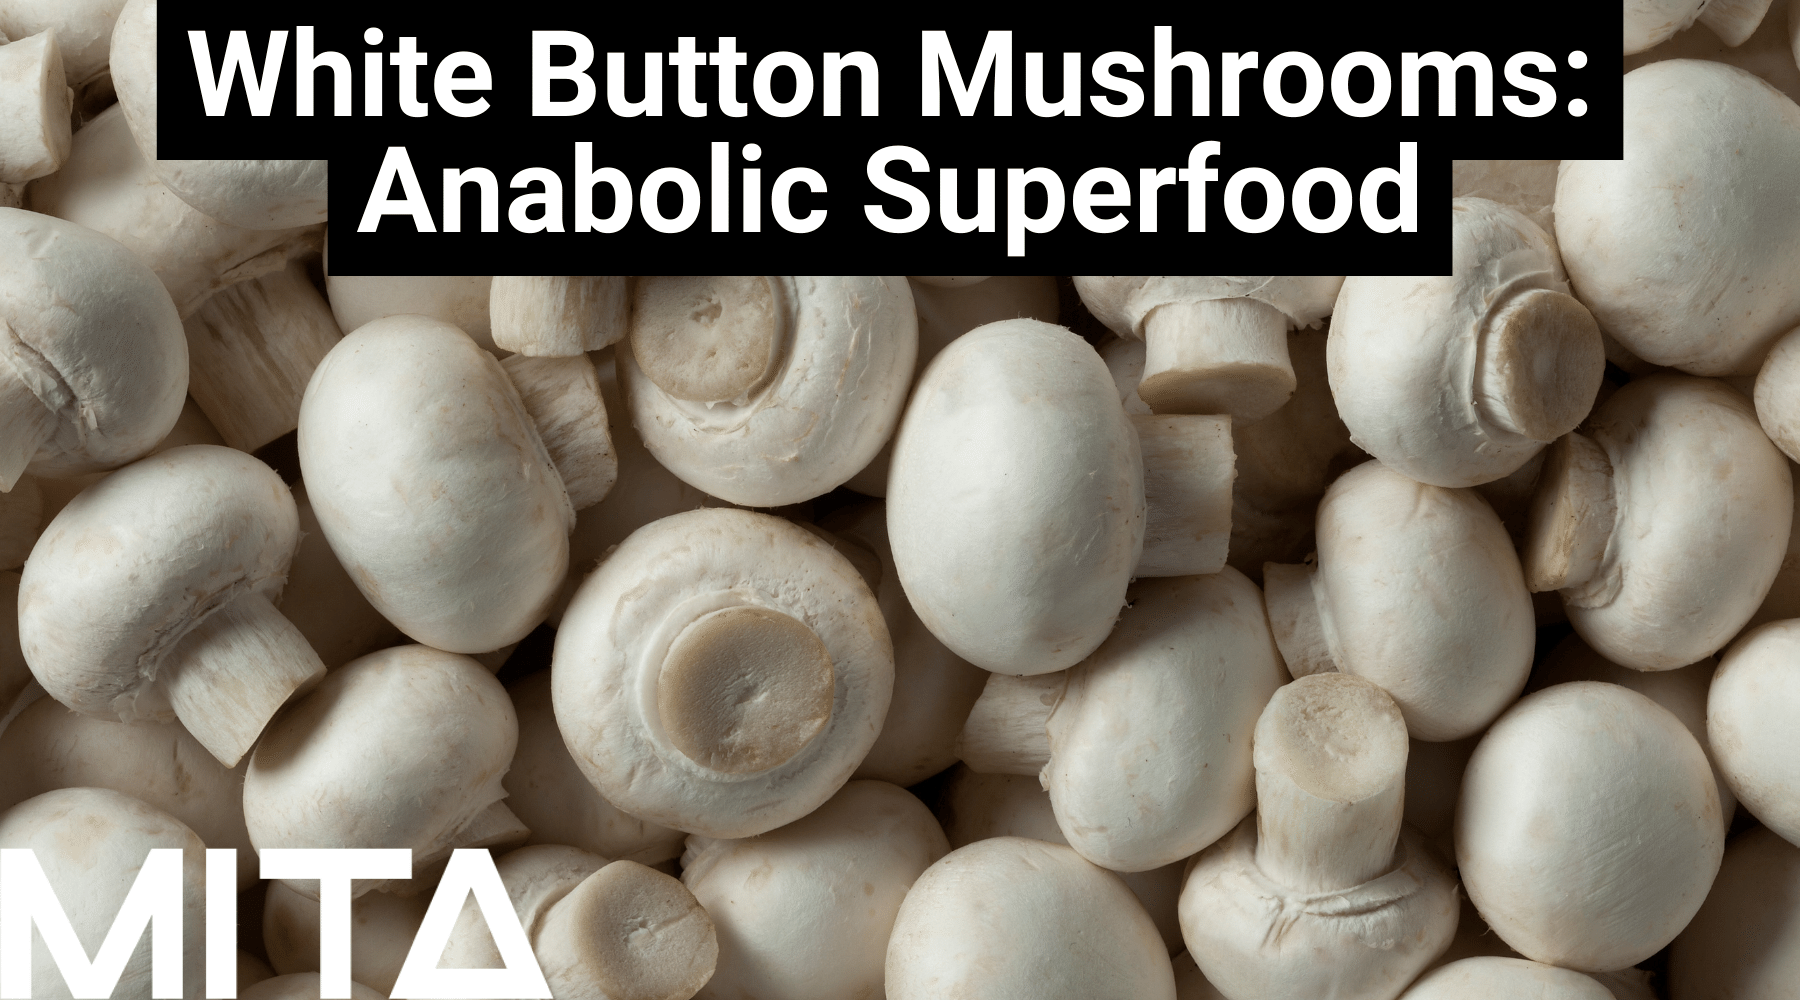 White Button Mushrooms: A Potent Shield for Health and Hormones